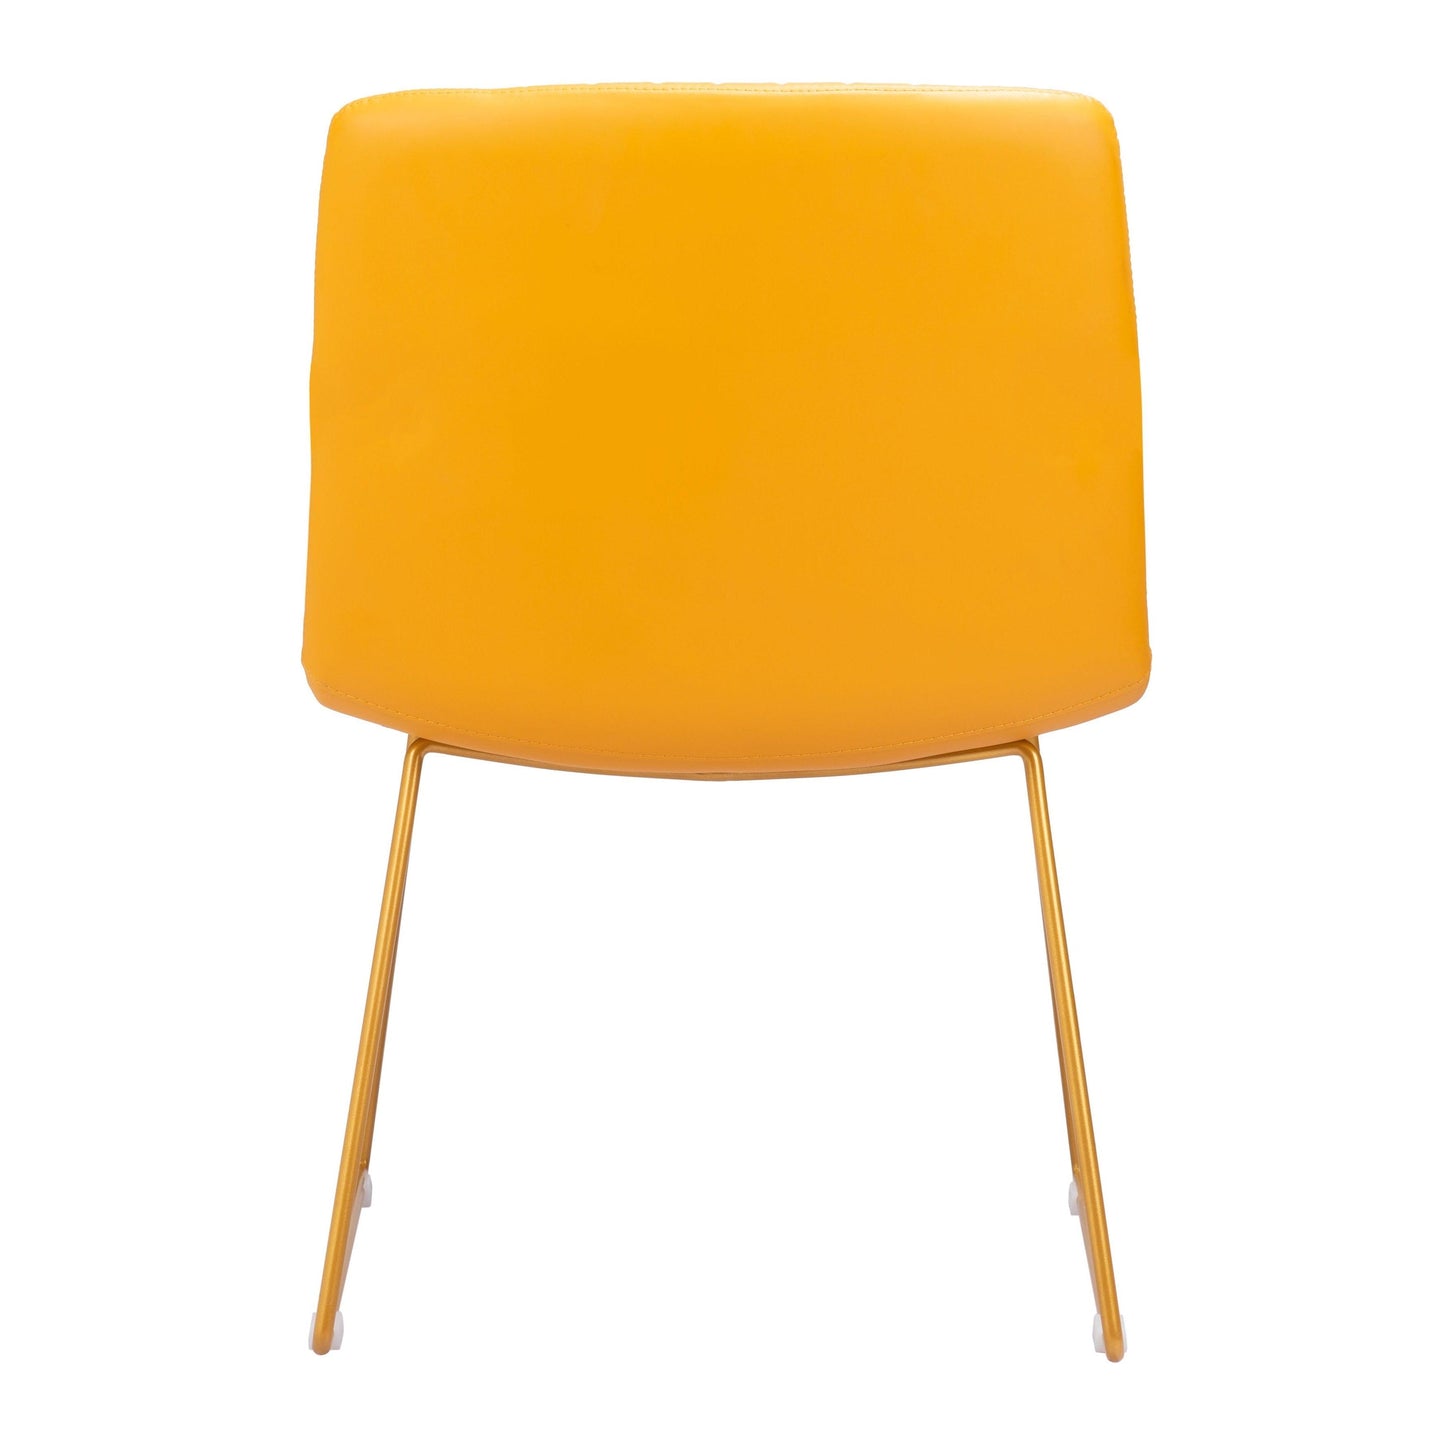 Joy Dining Chair (Set of 2) Yellow - Sideboards and Things Back Type_Full Back, Back Type_With Back, Brand_Zuo Modern, Color_Yellow, Depth_20-30, Finish_Powder Coated, Height_30-40, Materials_Metal, Materials_Upholstery, Metal Type_Steel, Number of Pieces_2PC Set, Product Type_Dining Height, Seat Material_Upholstery, Shape_Armless, Upholstery Type_Leather, Upholstery Type_Vegan Leather, Width_20-30